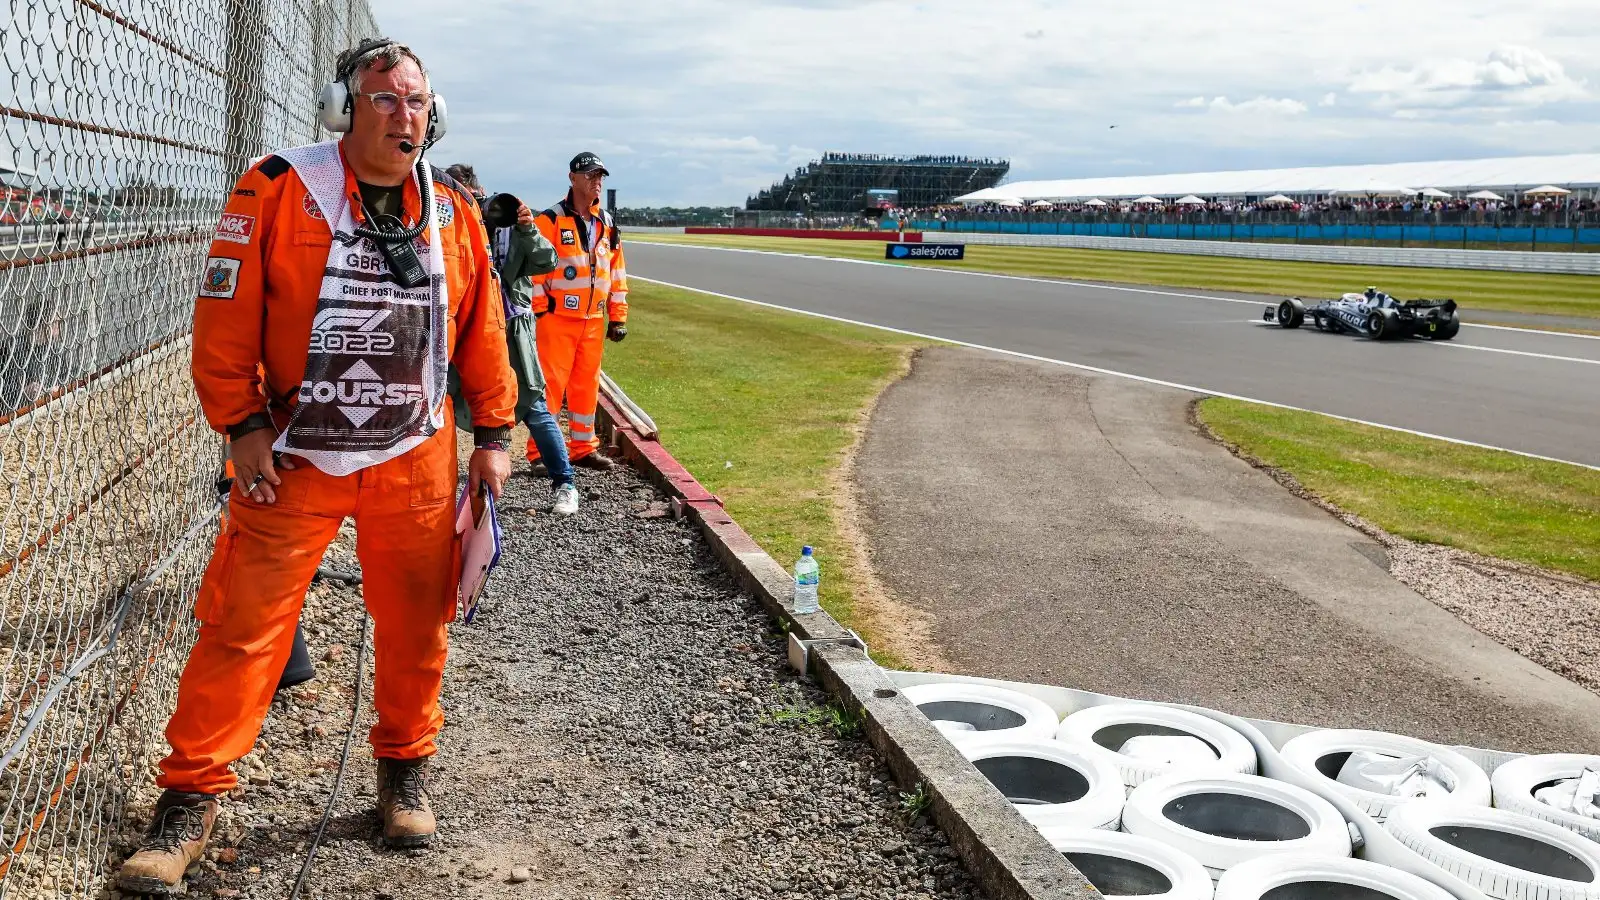 A marshal watches the cars go by at Silverstone.